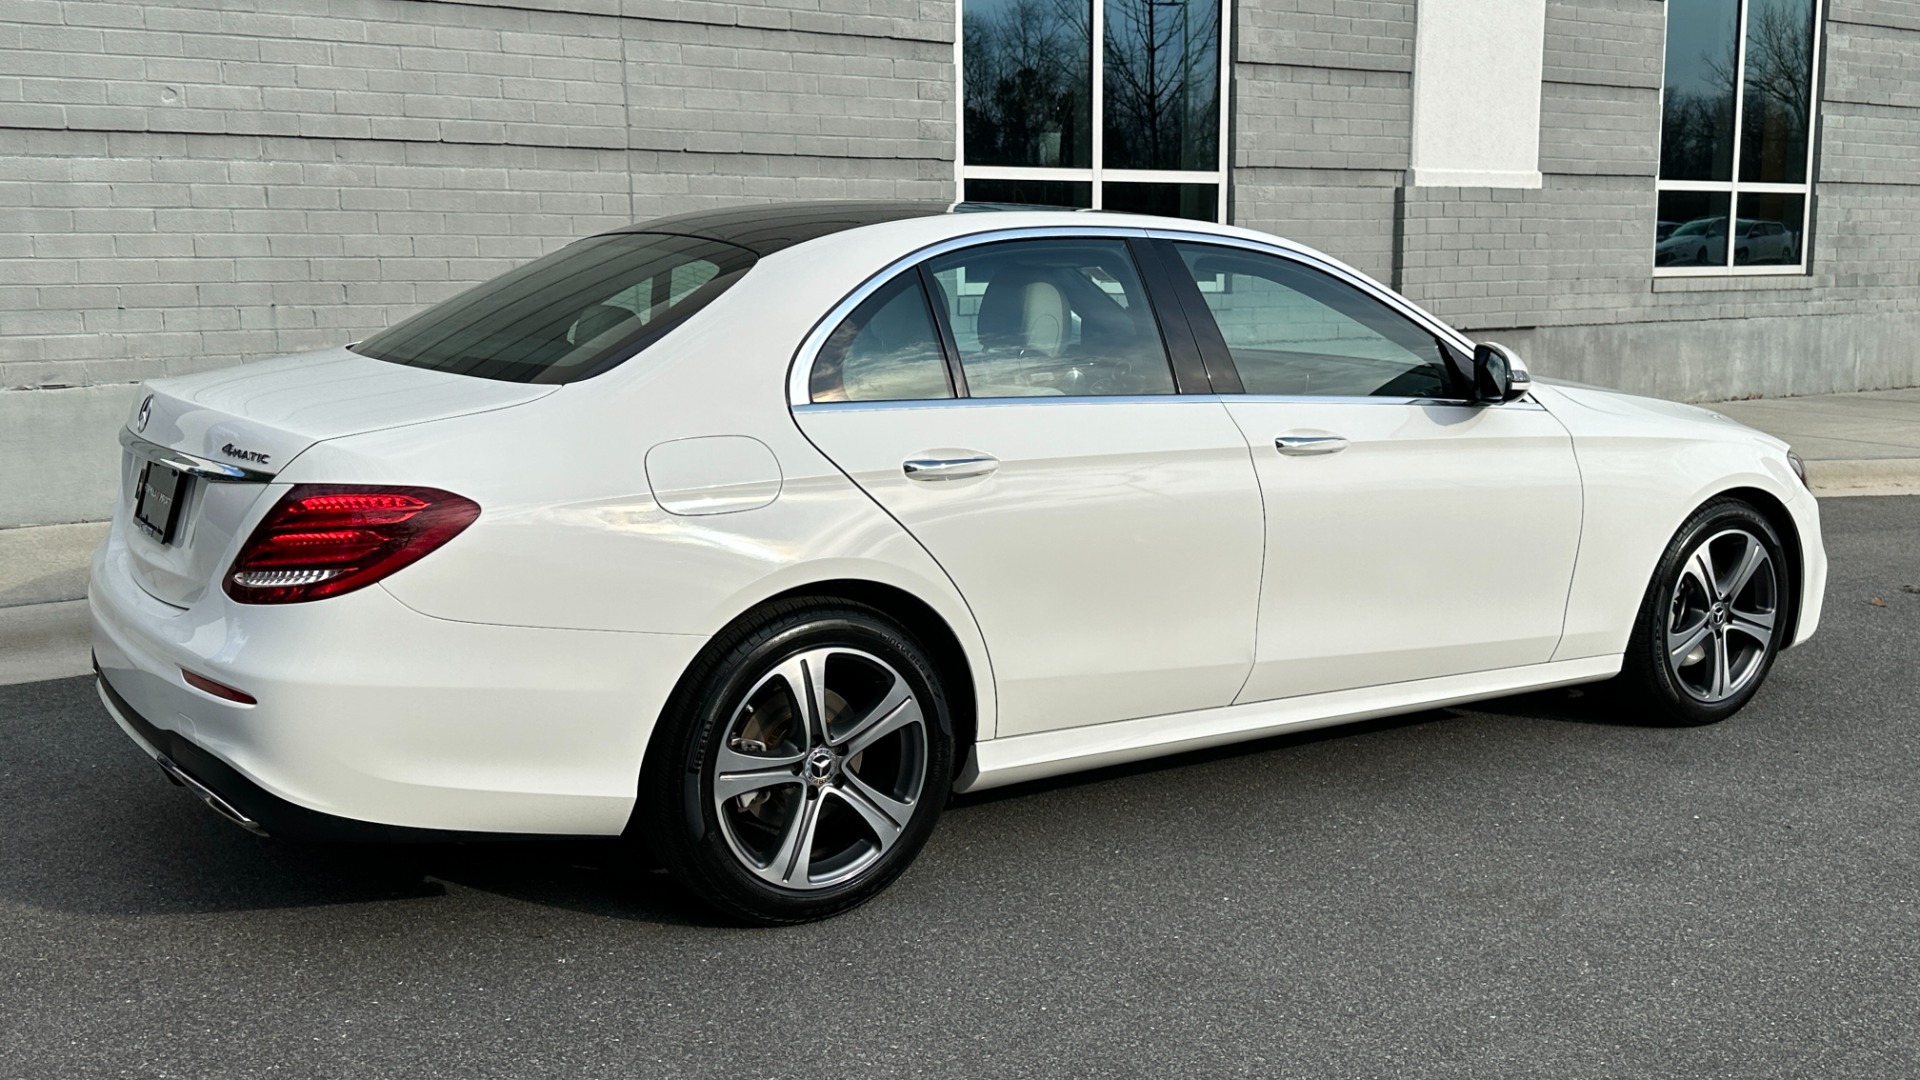 Used 2019 Mercedes-Benz E-Class E300 / PREMIUM PACKAGE / BLIND SPOT / BURMESTER SOUND / HEATED STEERING for sale $41,495 at Formula Imports in Charlotte NC 28227 4